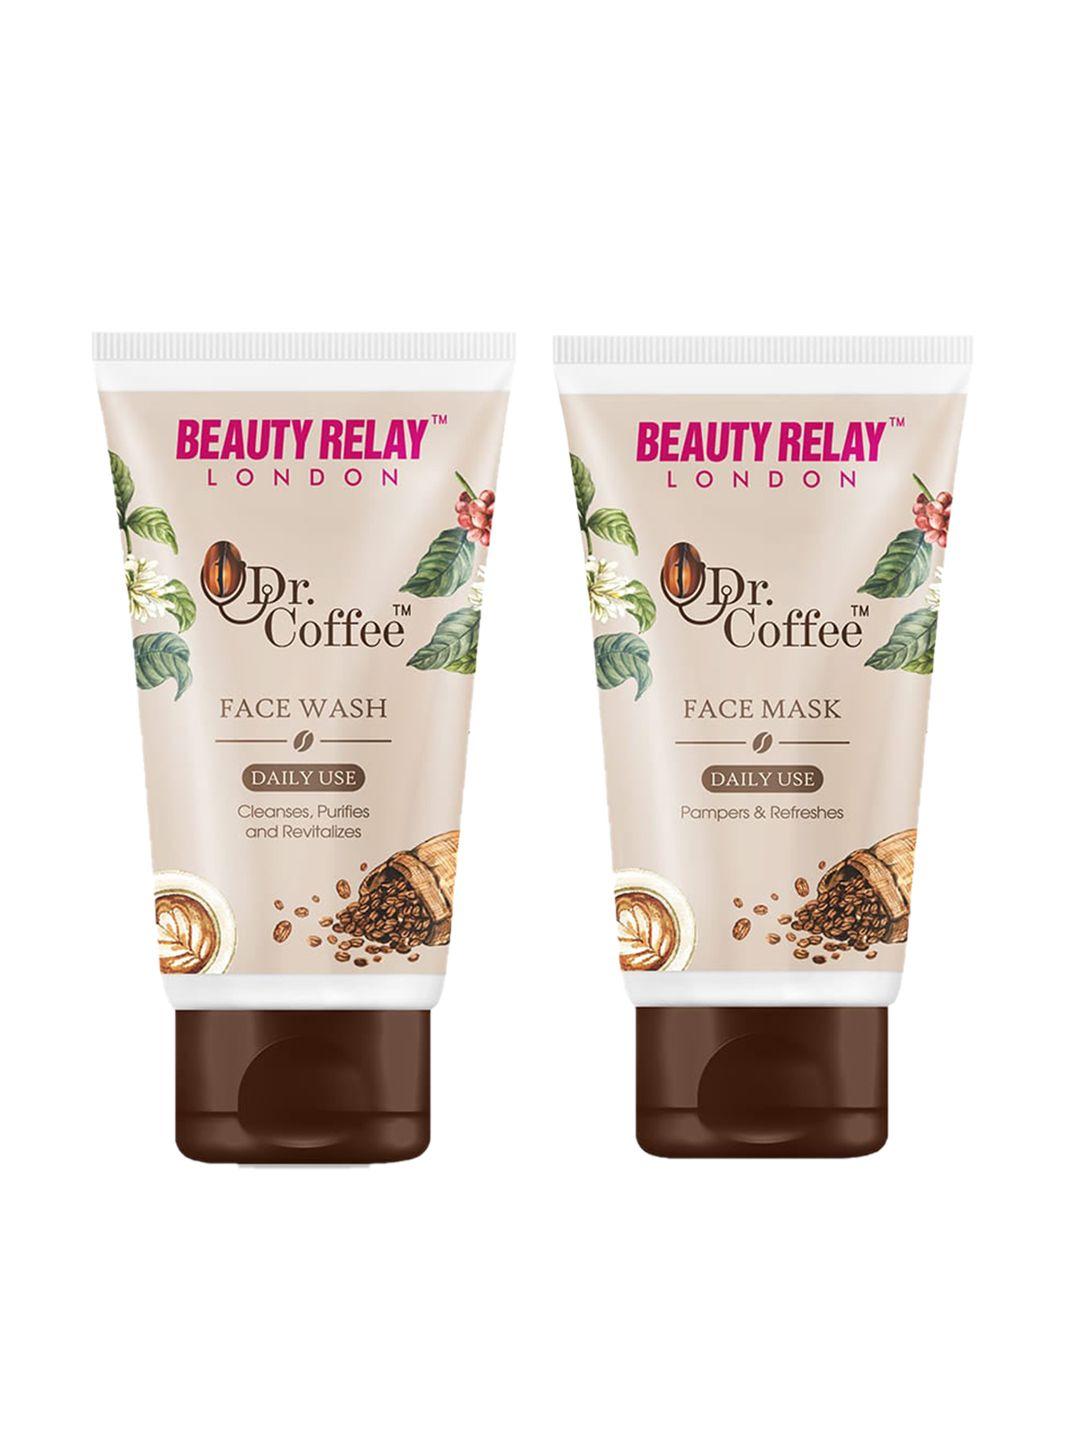 beautyrelay london dr. coffee face wash & face mask 200 ml each - buy 1 get 1 free